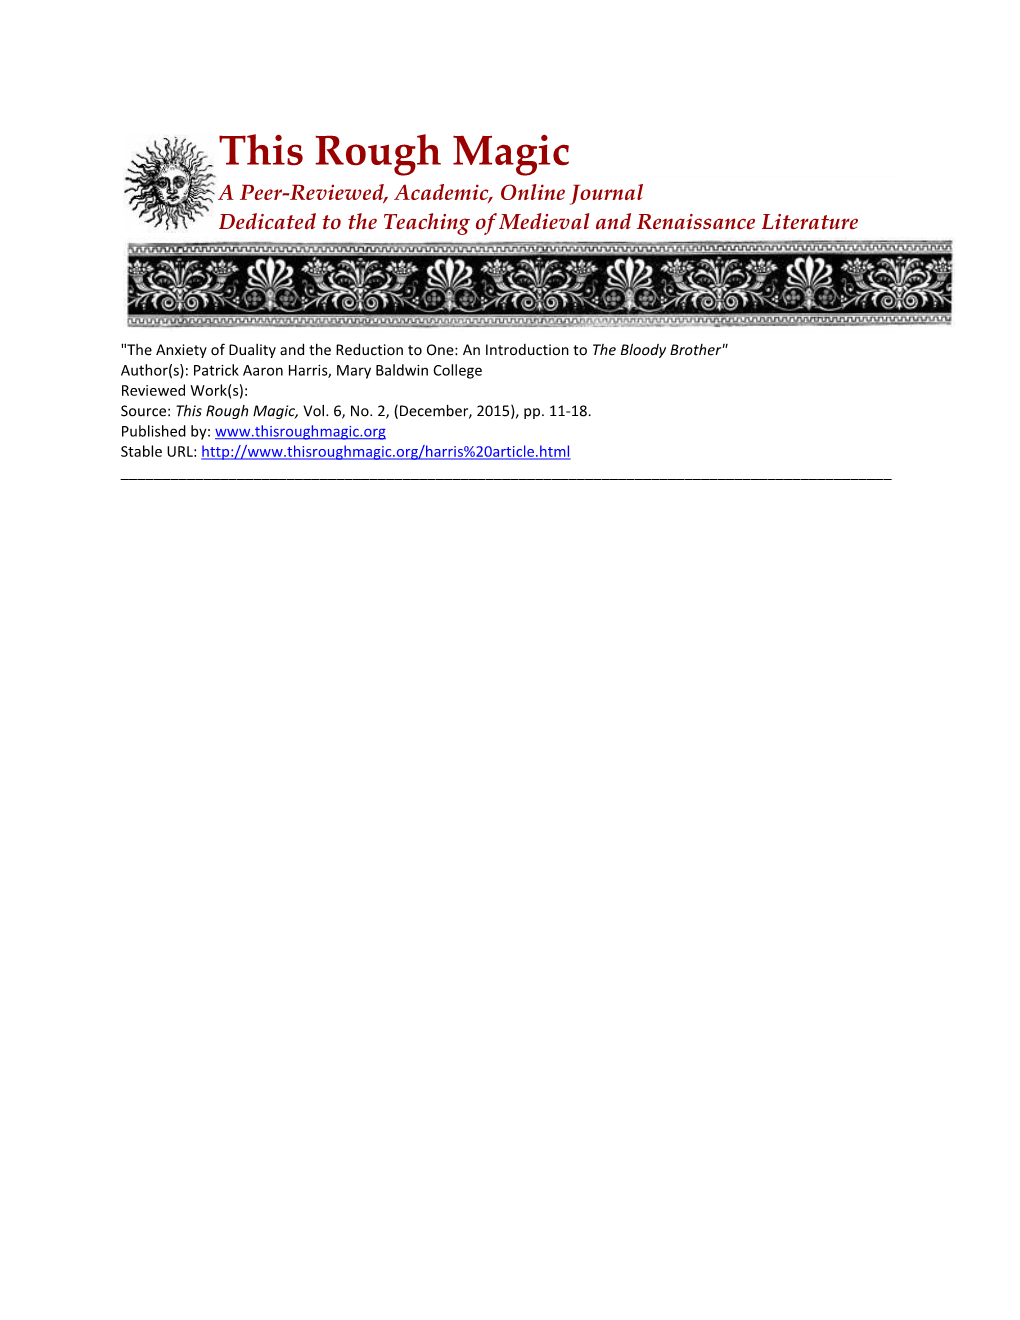 This Rough Magic a Peer-Reviewed, Academic, Online Journal Dedicated to the Teaching of Medieval and Renaissance Literature